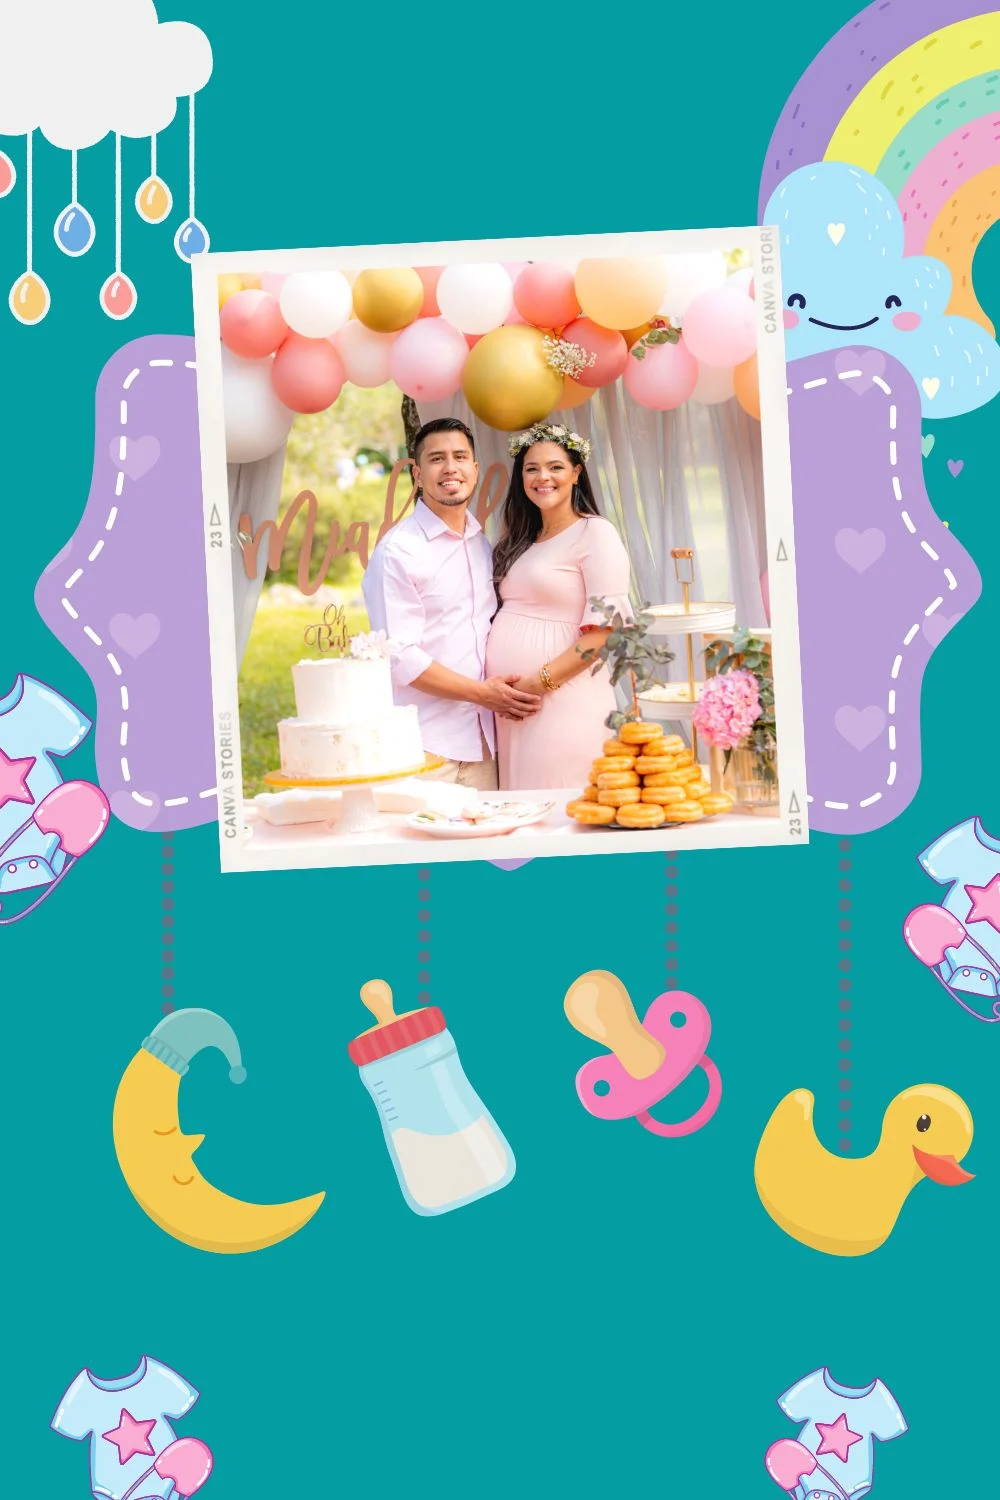 couple having baby shower with balloons on background